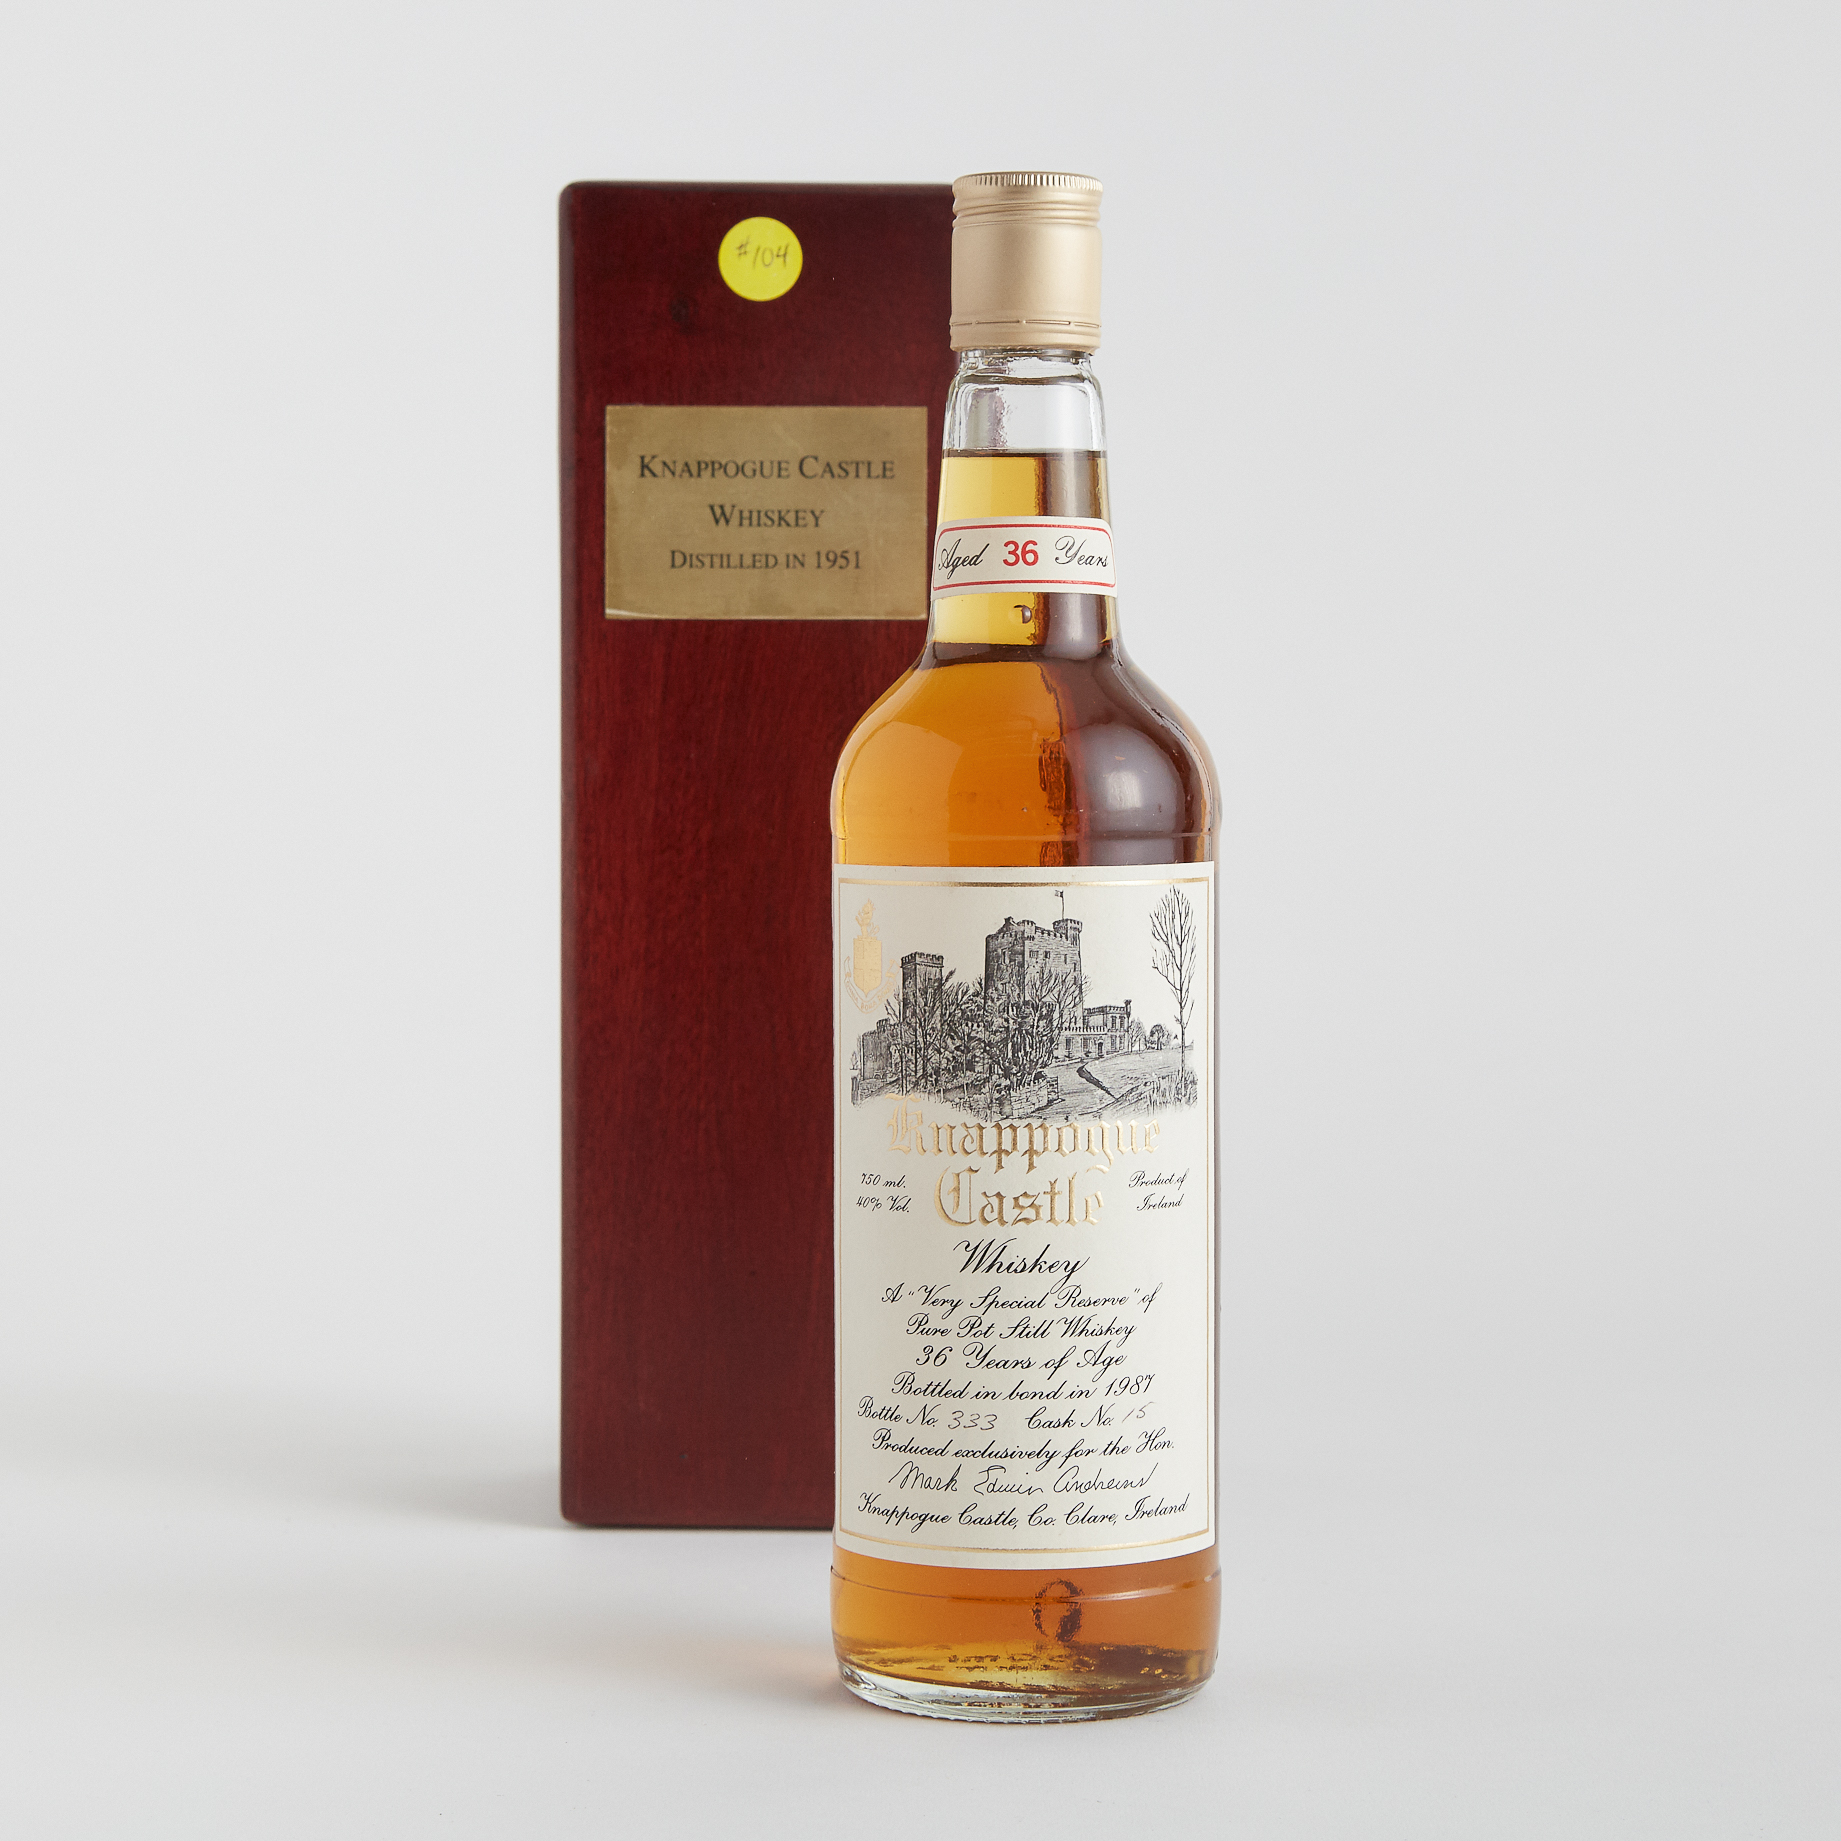 KNAPPOGUE CASTLE WHISKY 36 YEARS (ONE 750 ML)